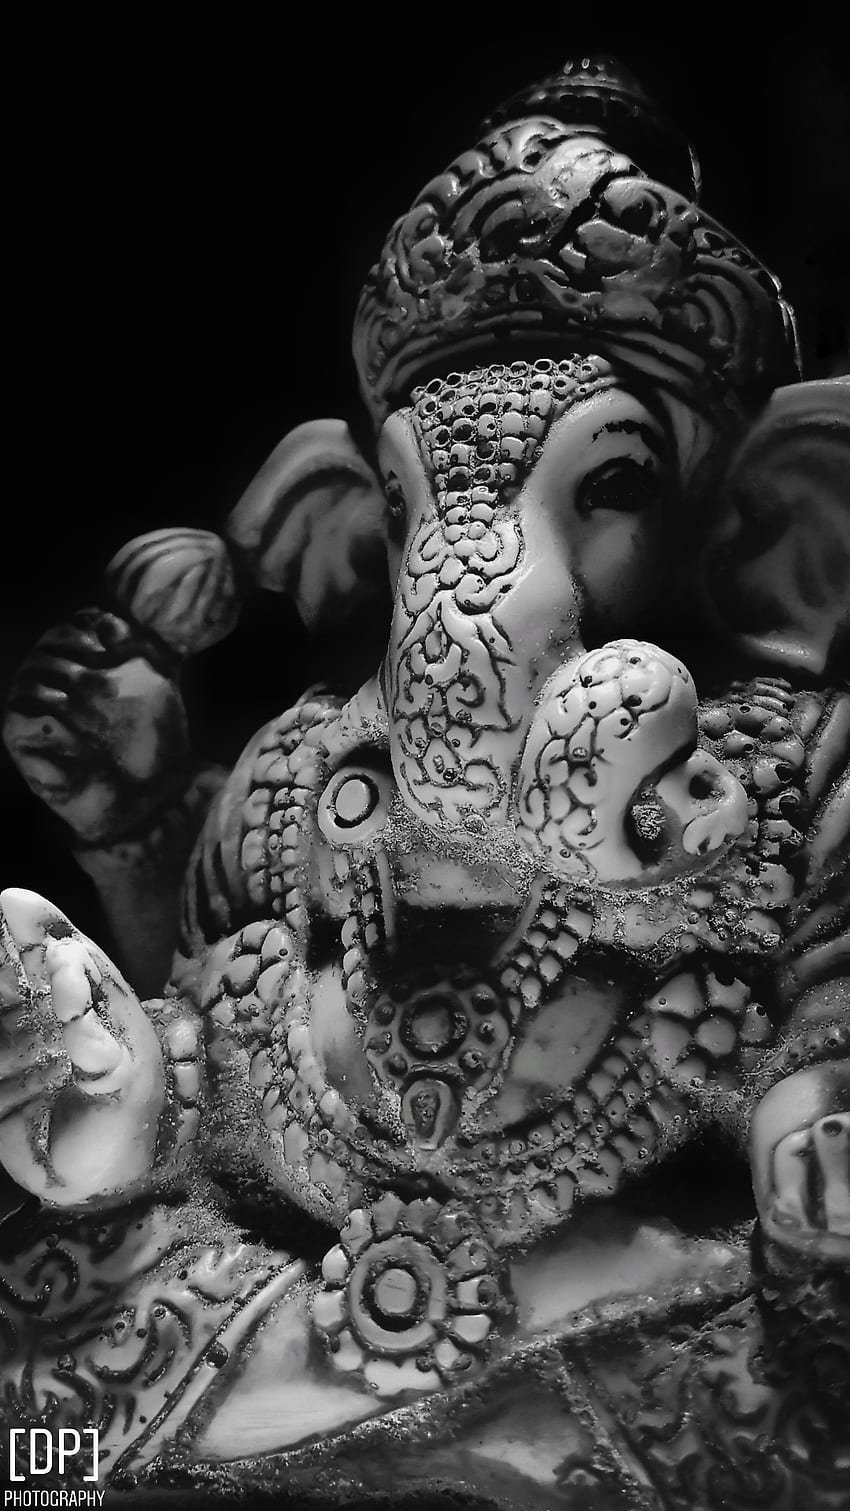 2393 Lord Ganesh Stock Video Footage  4K and HD Video Clips  Shutterstock